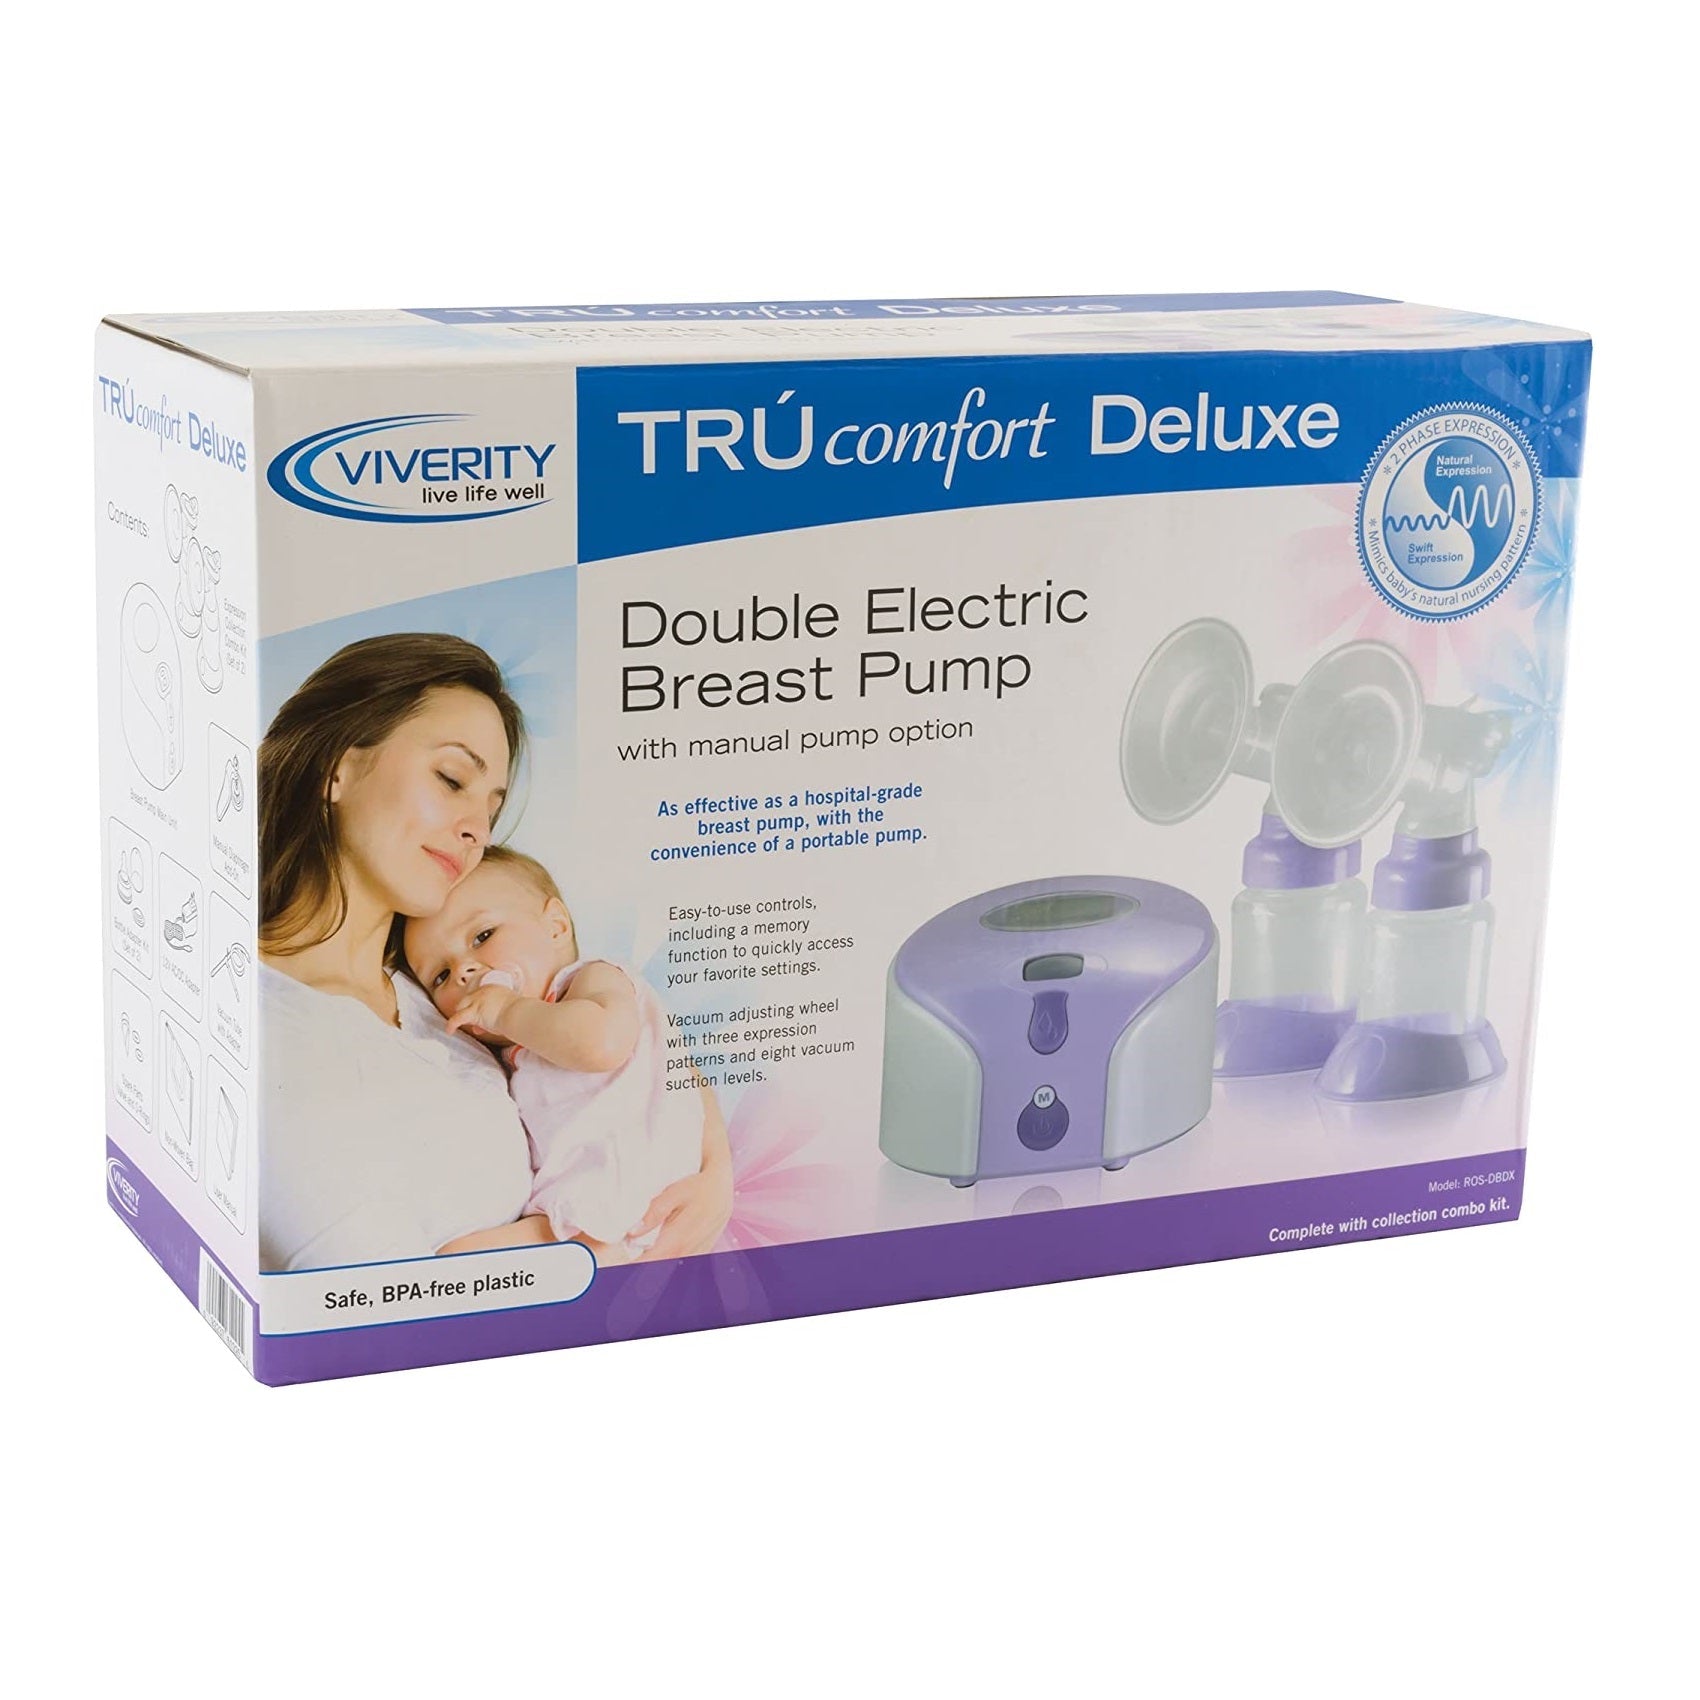 Viverity Deluxe Double Electric Breast Pump with Manual Pump Option - physio supplies canada